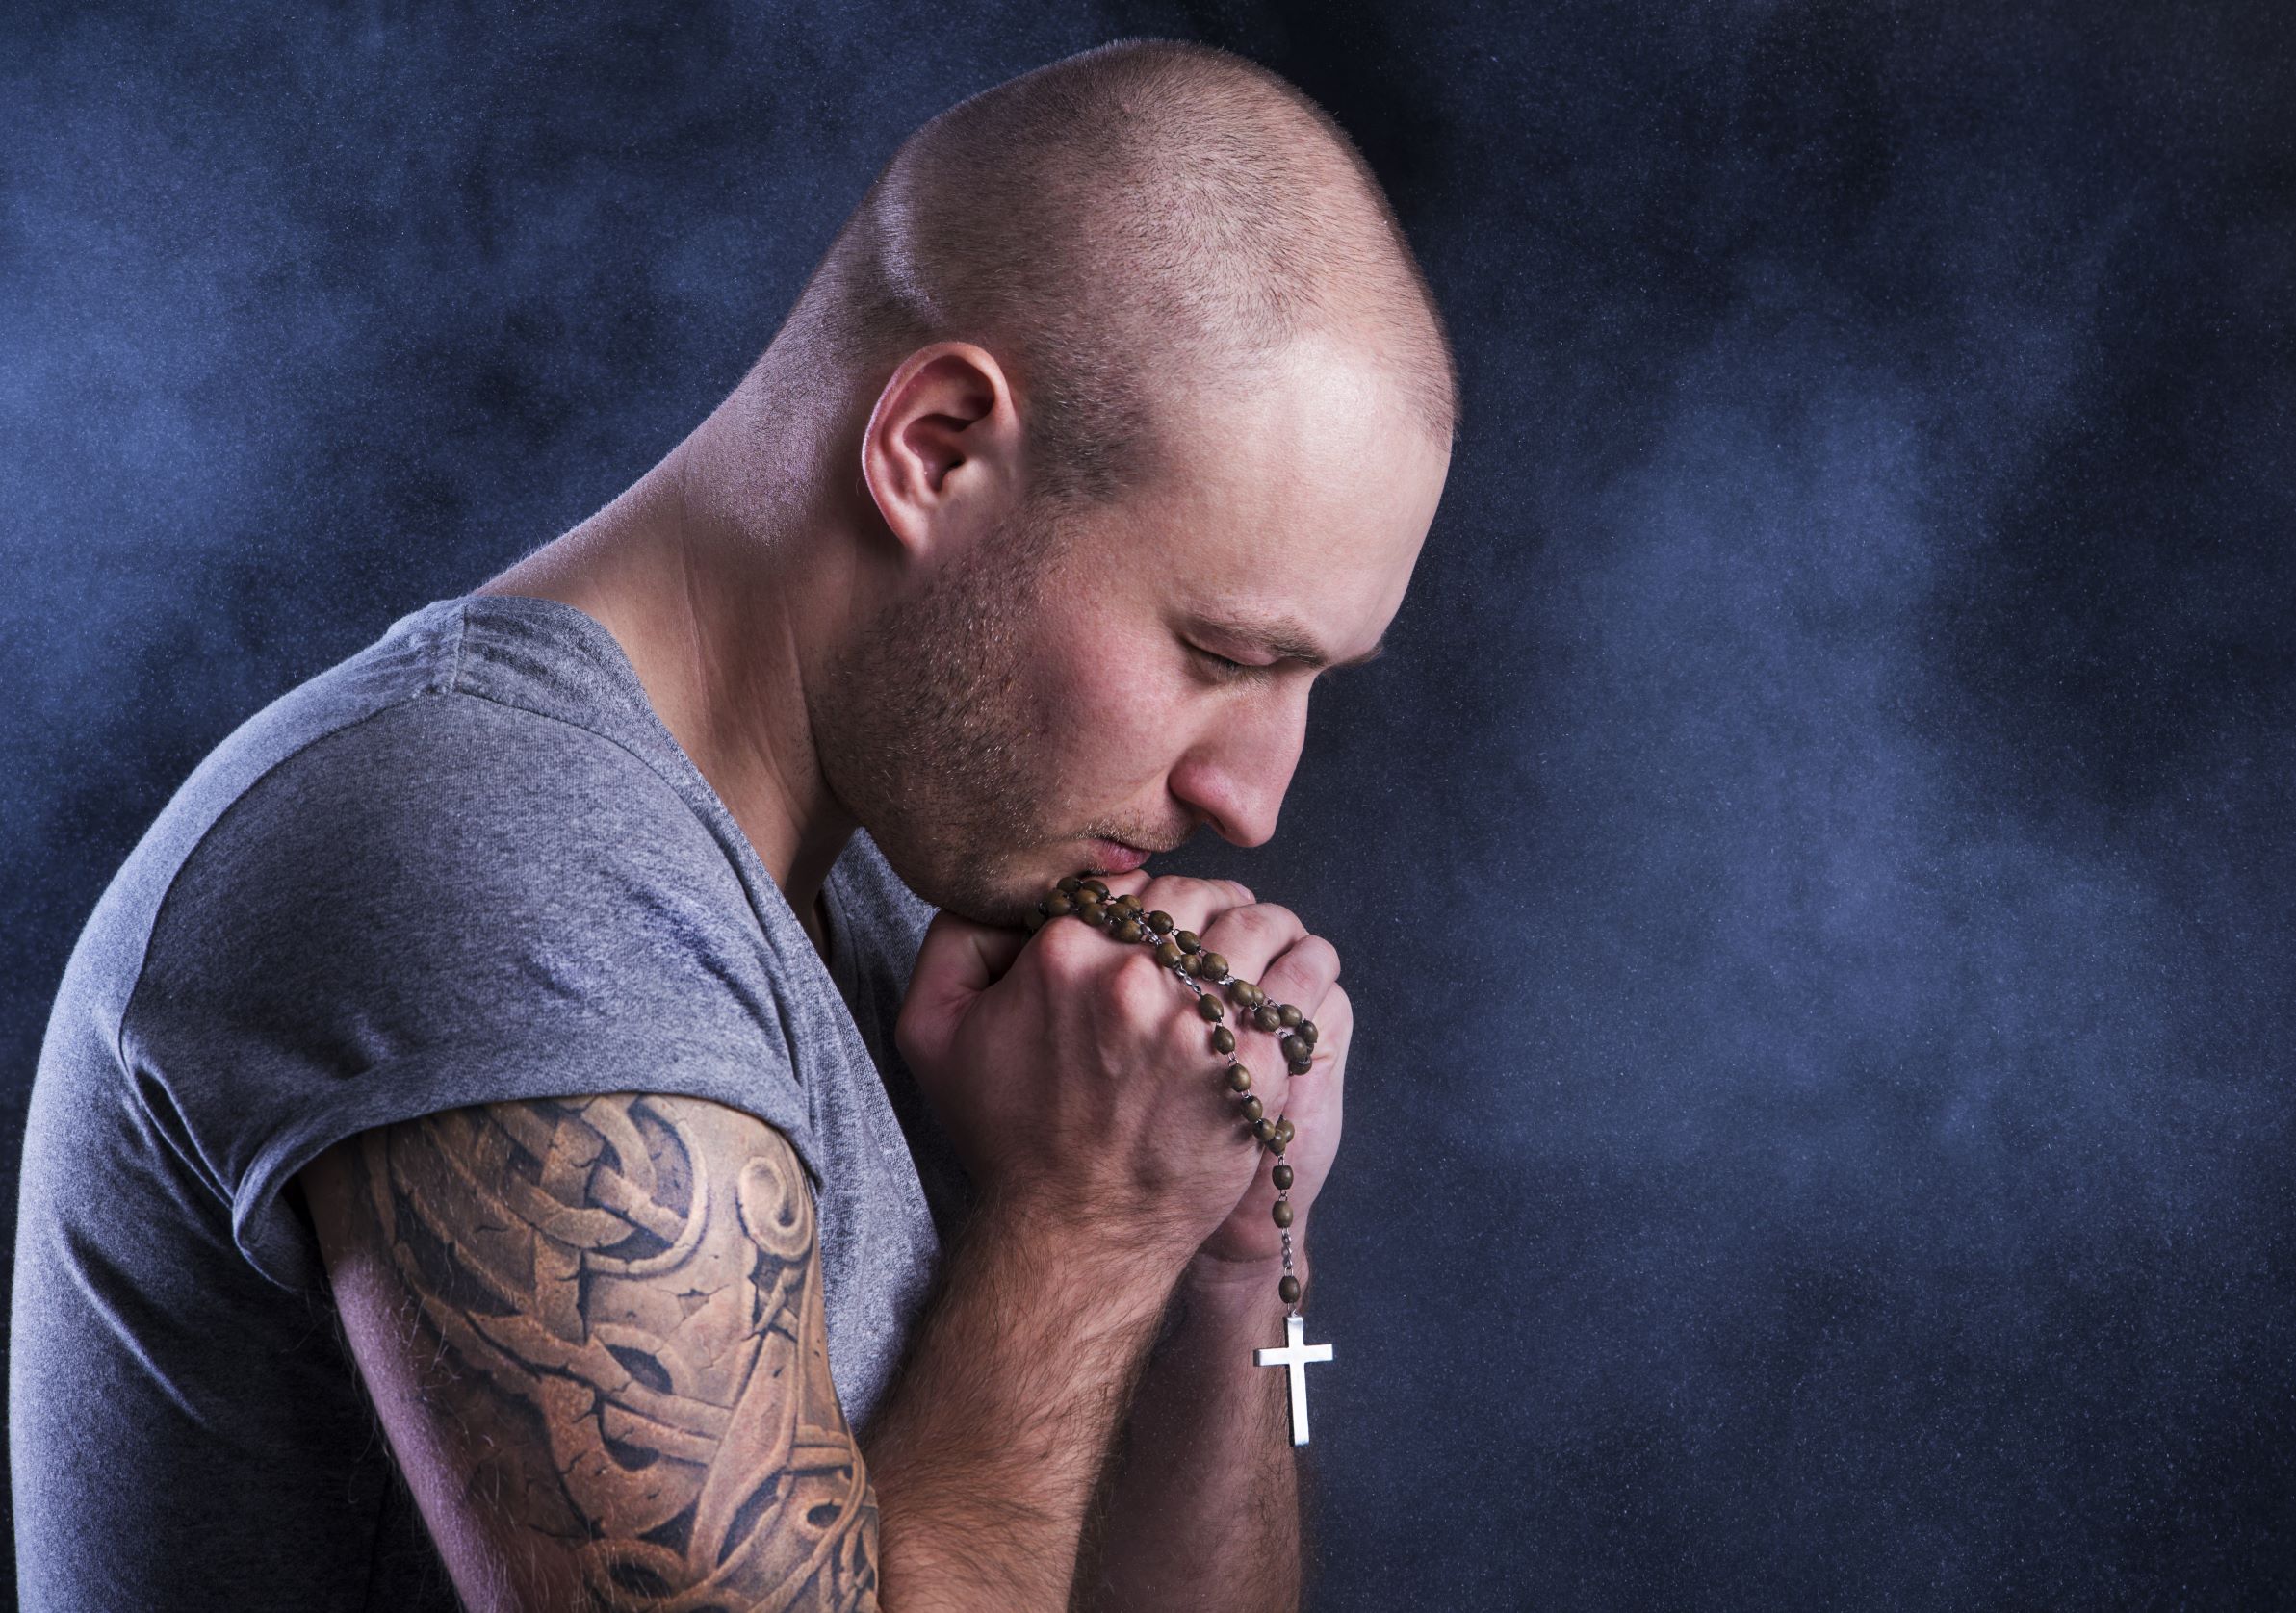 Christian Man Tattooed With Rosary Praying Hands